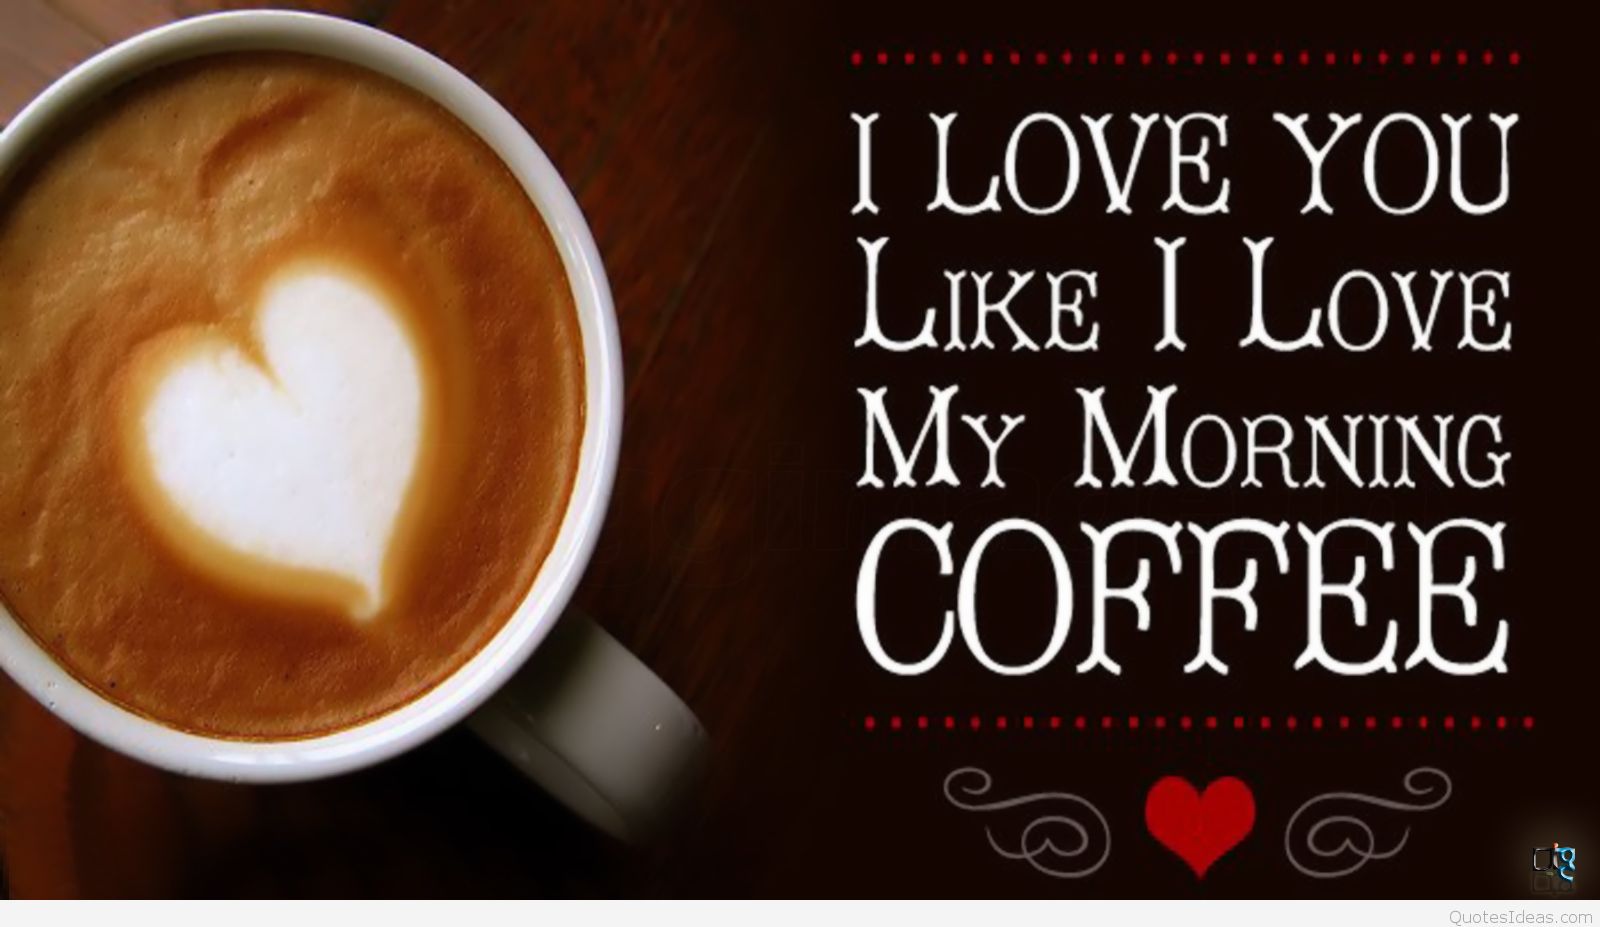 I Love You Coffee Wallpaper - Coffee With Love Quotes - HD Wallpaper 